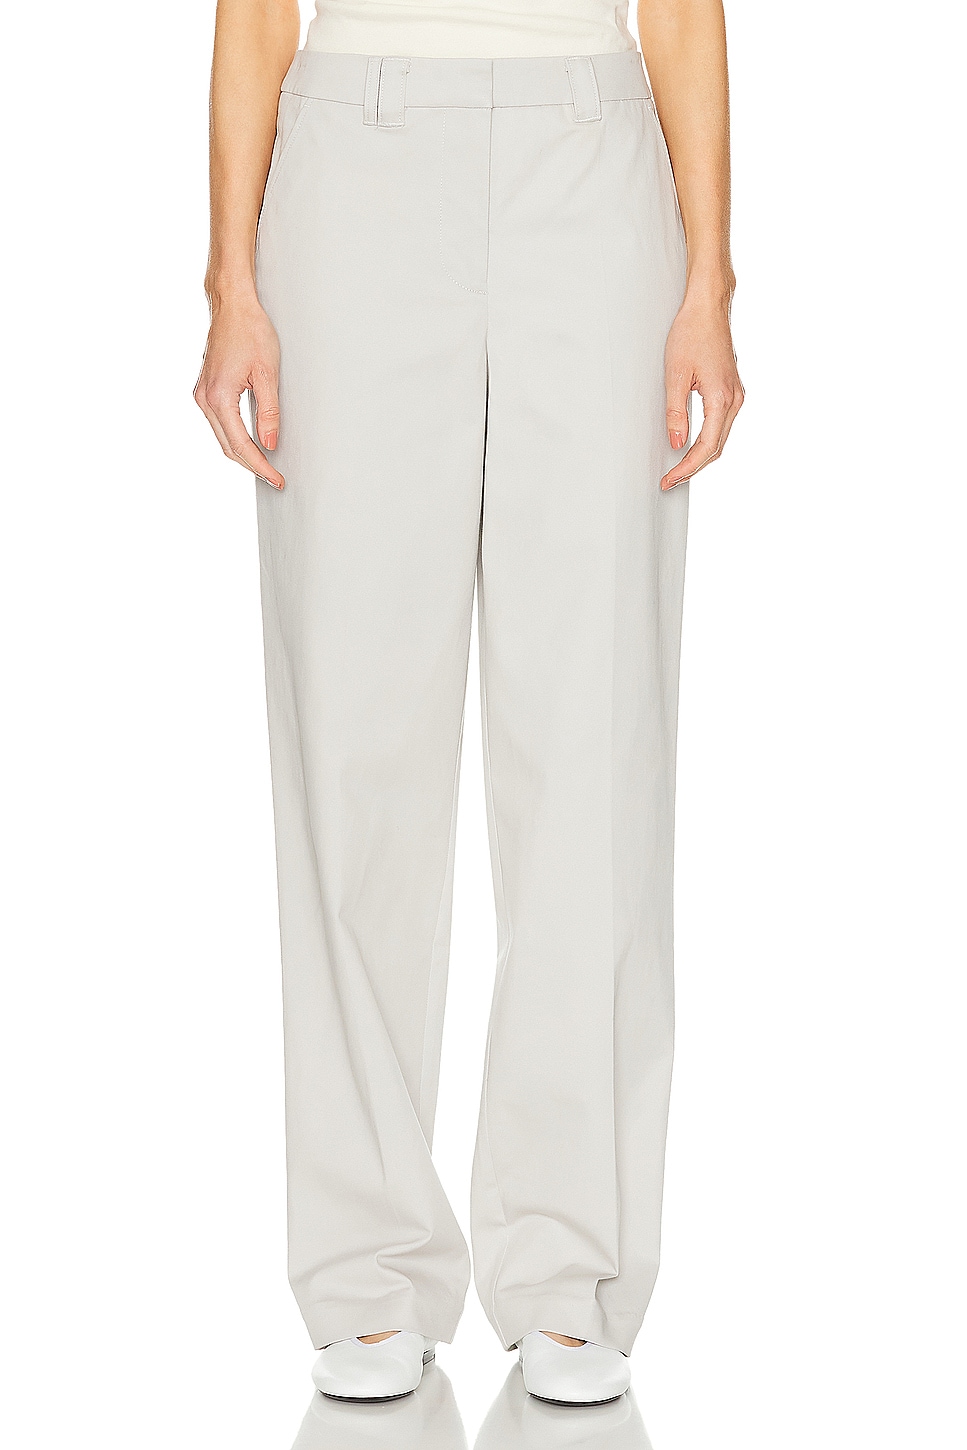 Image 1 of GRLFRND Slouchy Chino Pant in Stone Grey